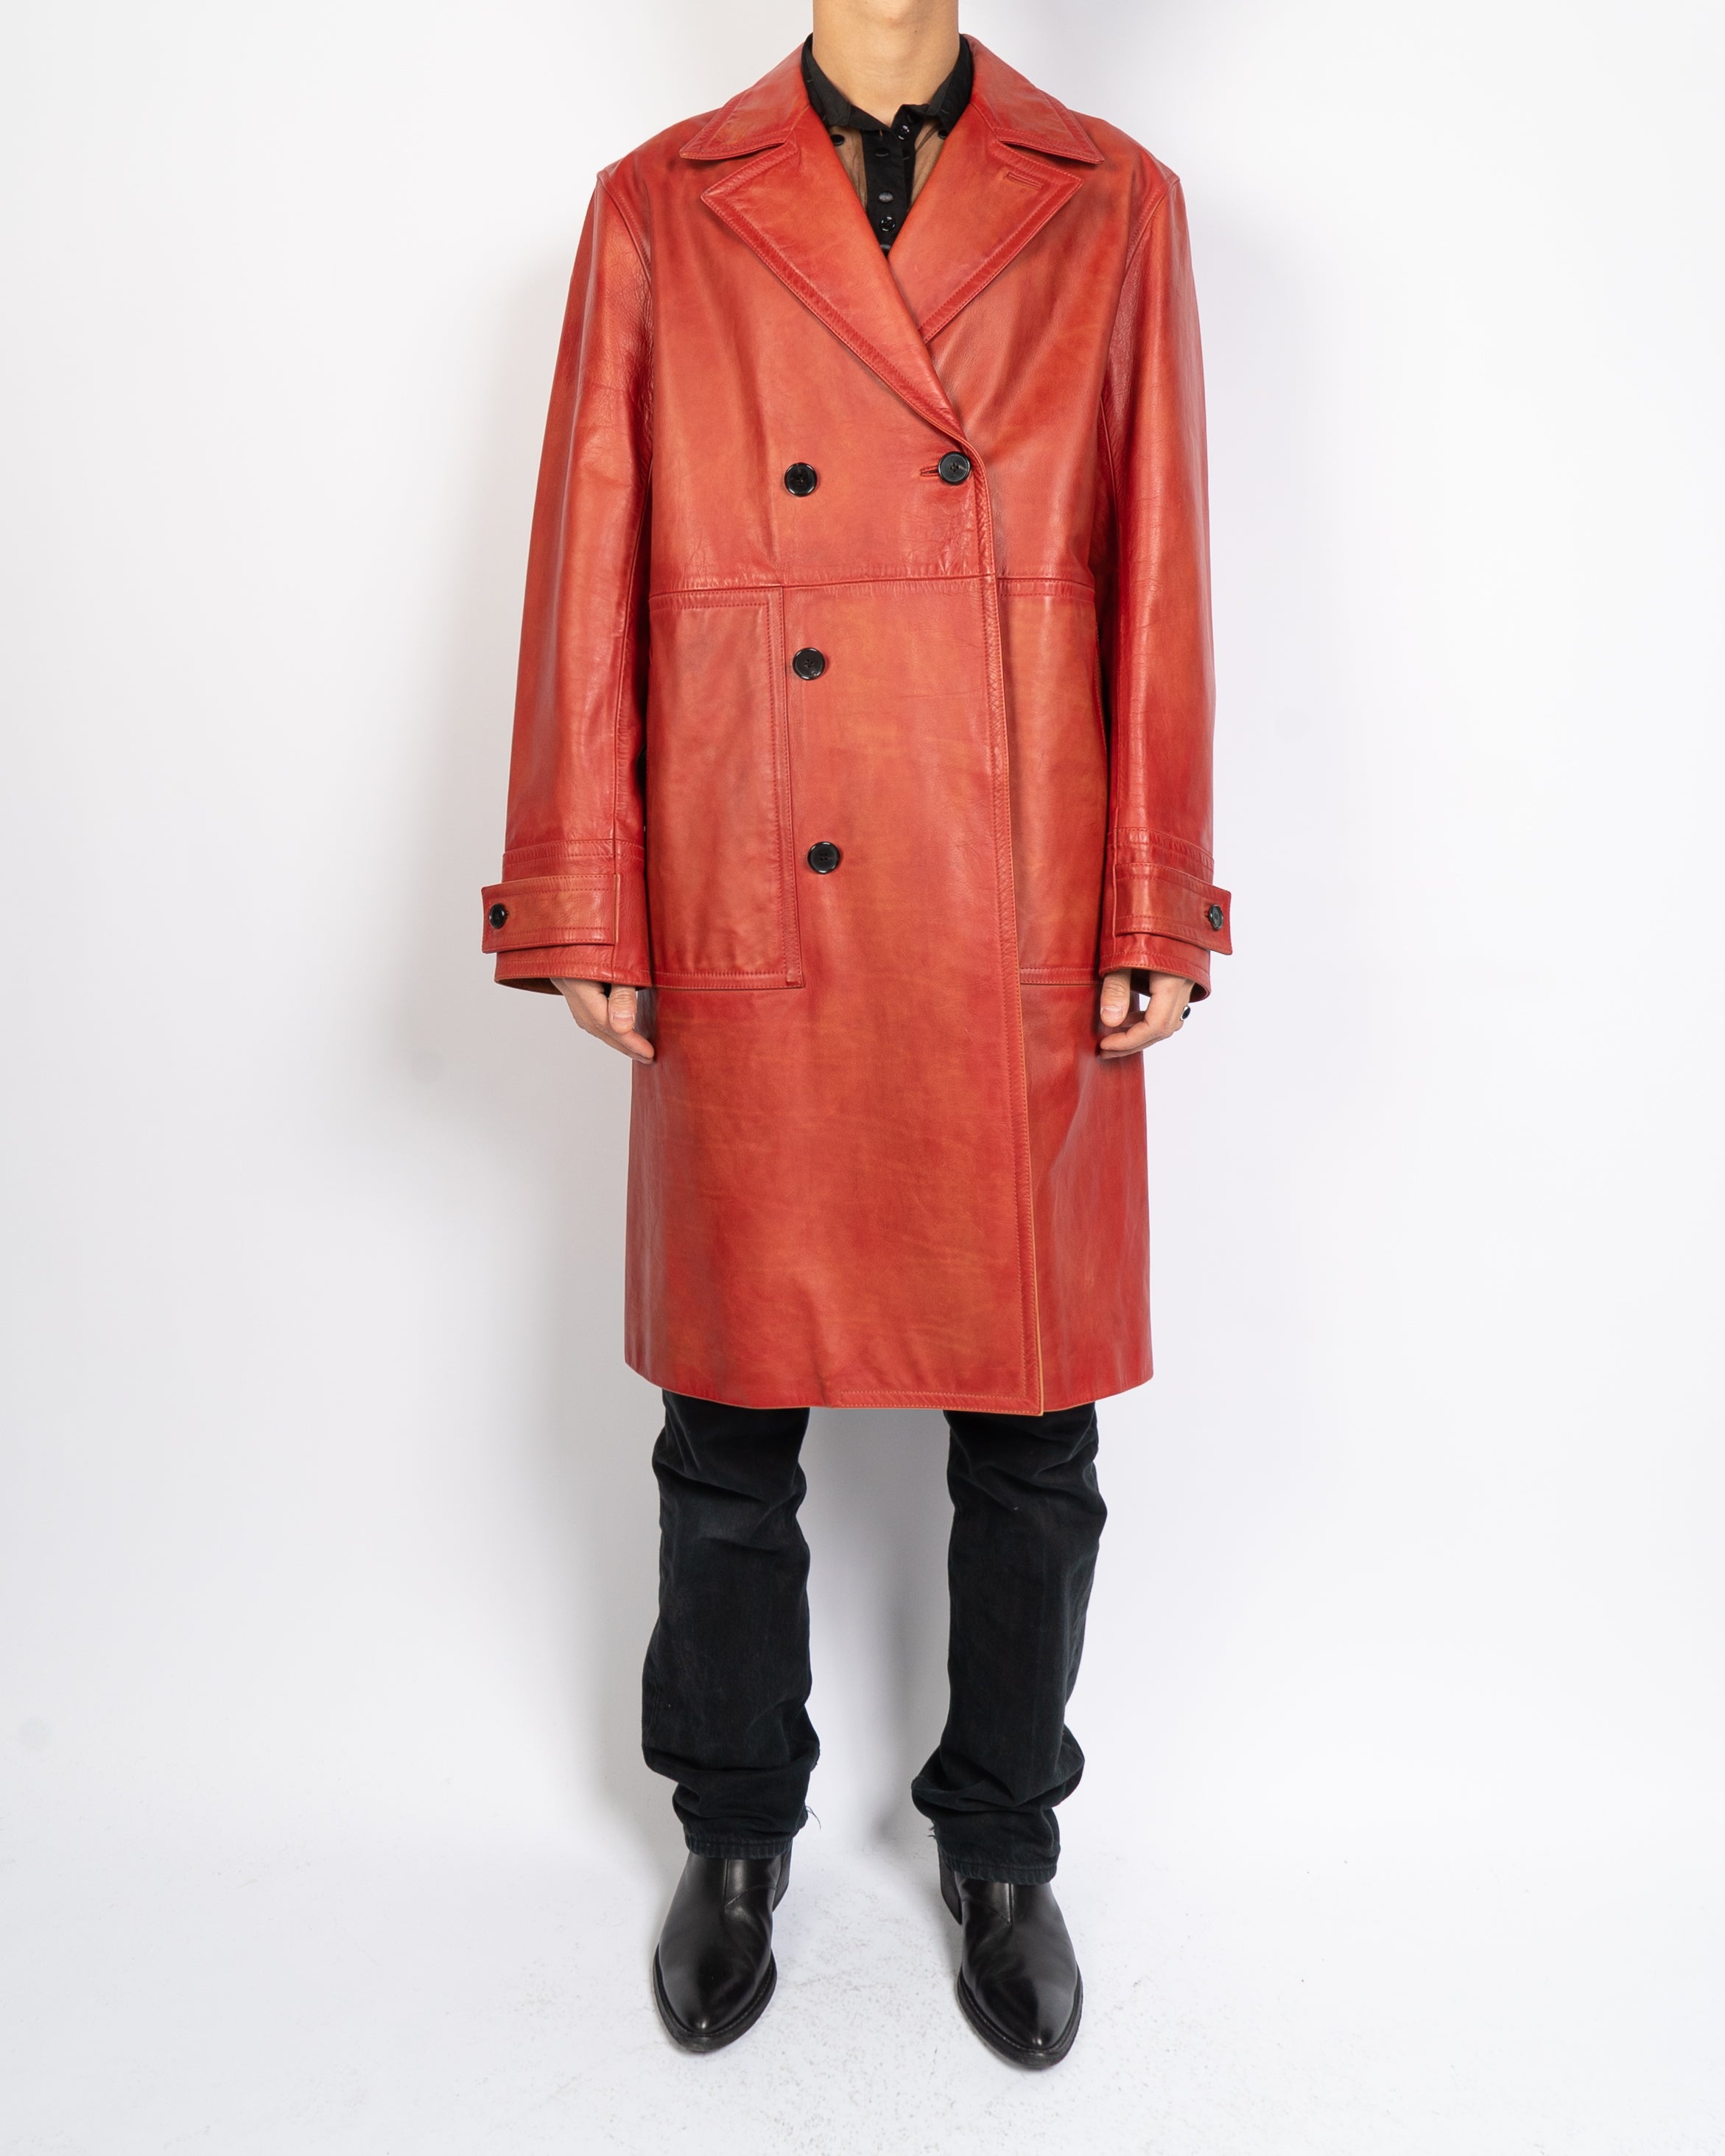 FW17 Blood Orange Painted Leather Double Breasted Coat